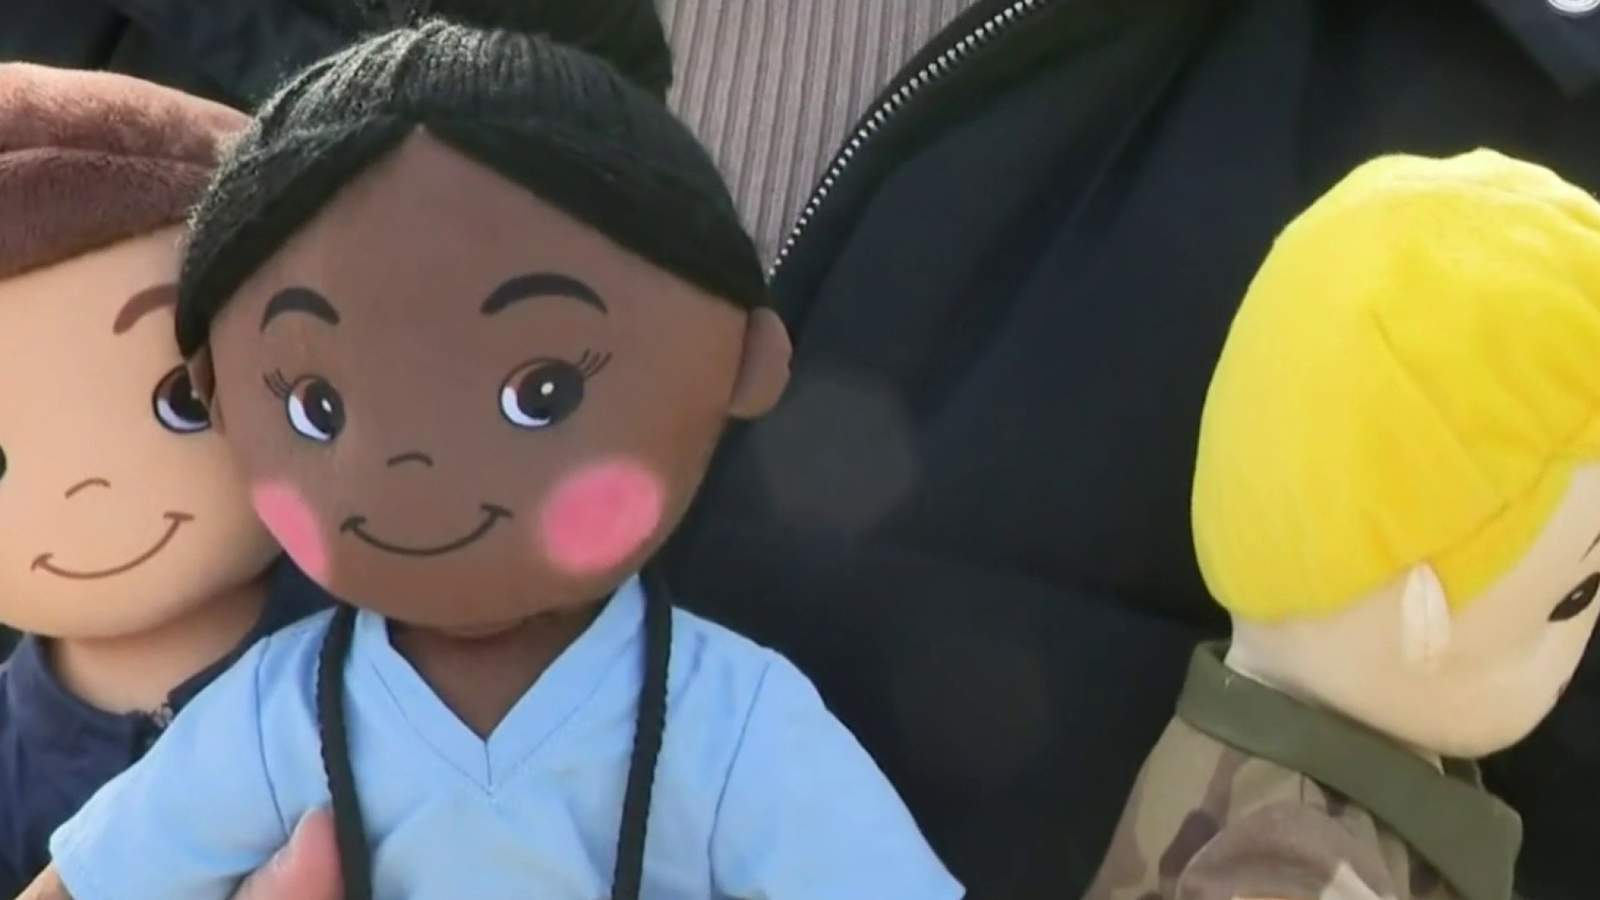 Metro Detroit officer creates dolls to comfort children of first responders, military members